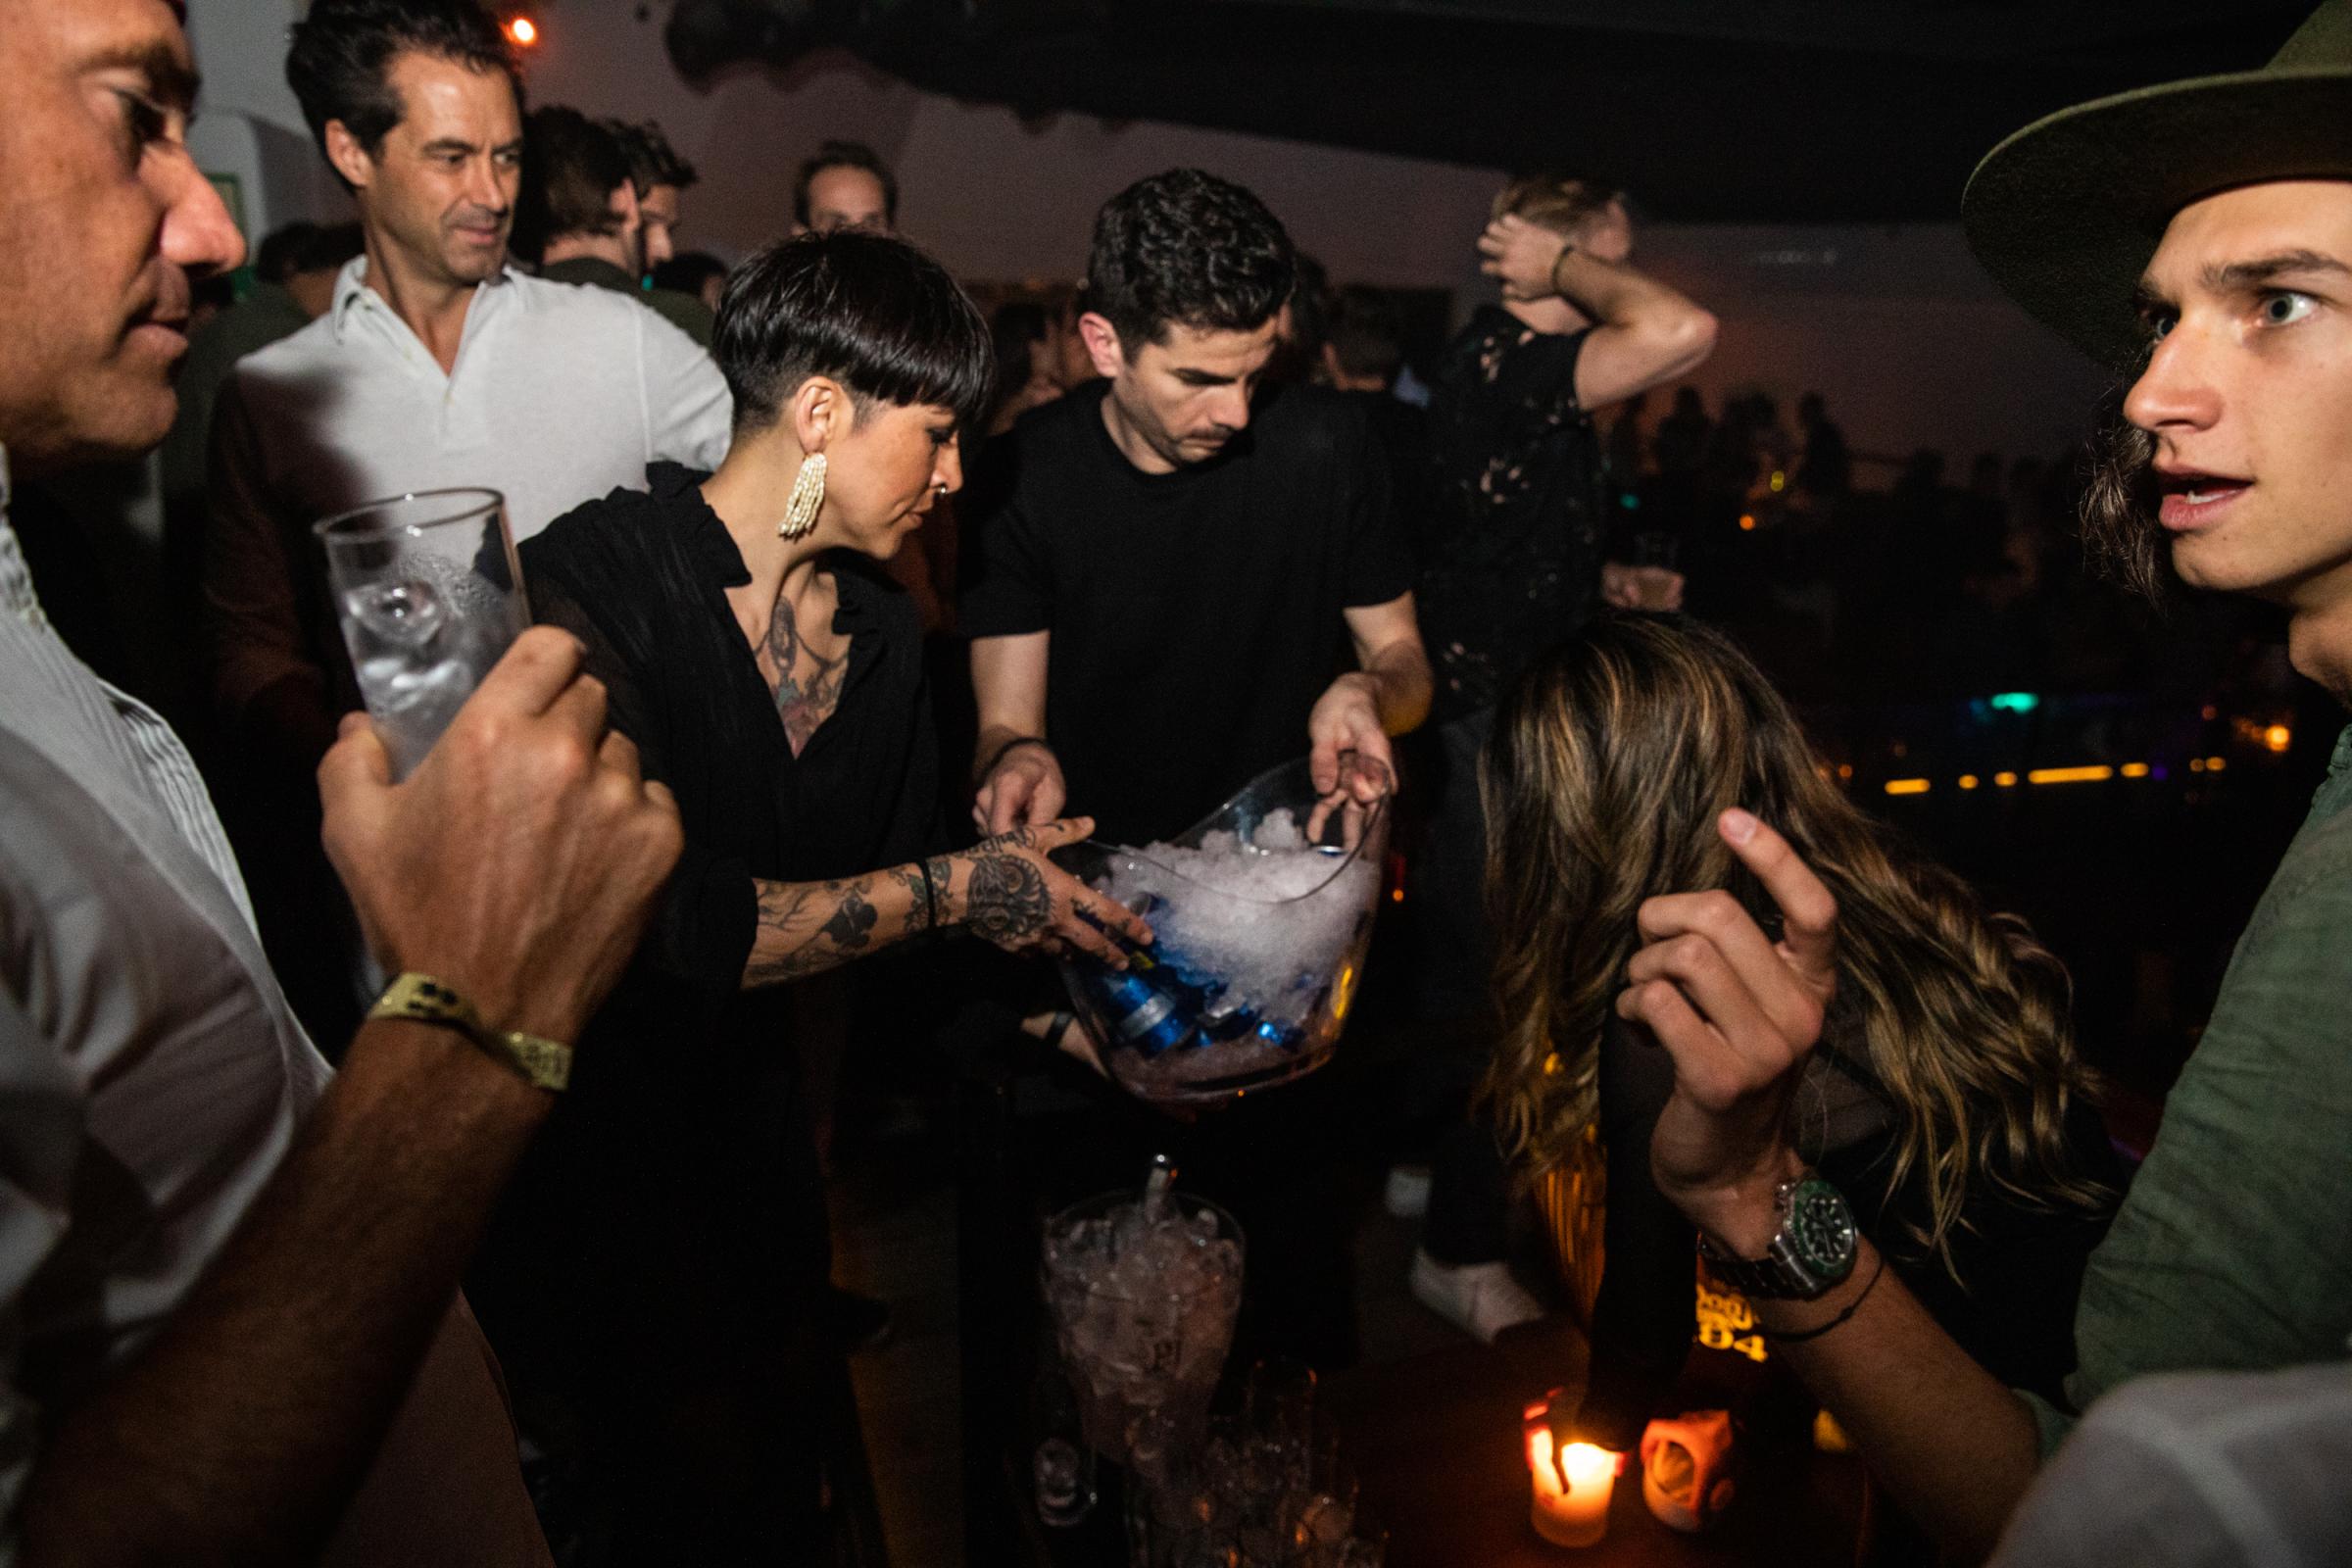 Grand Opening At Pacha Ibiza Heralds A Pre-Pandemic Party Season - Customers in the reserved area of the Pacha Ibiza...